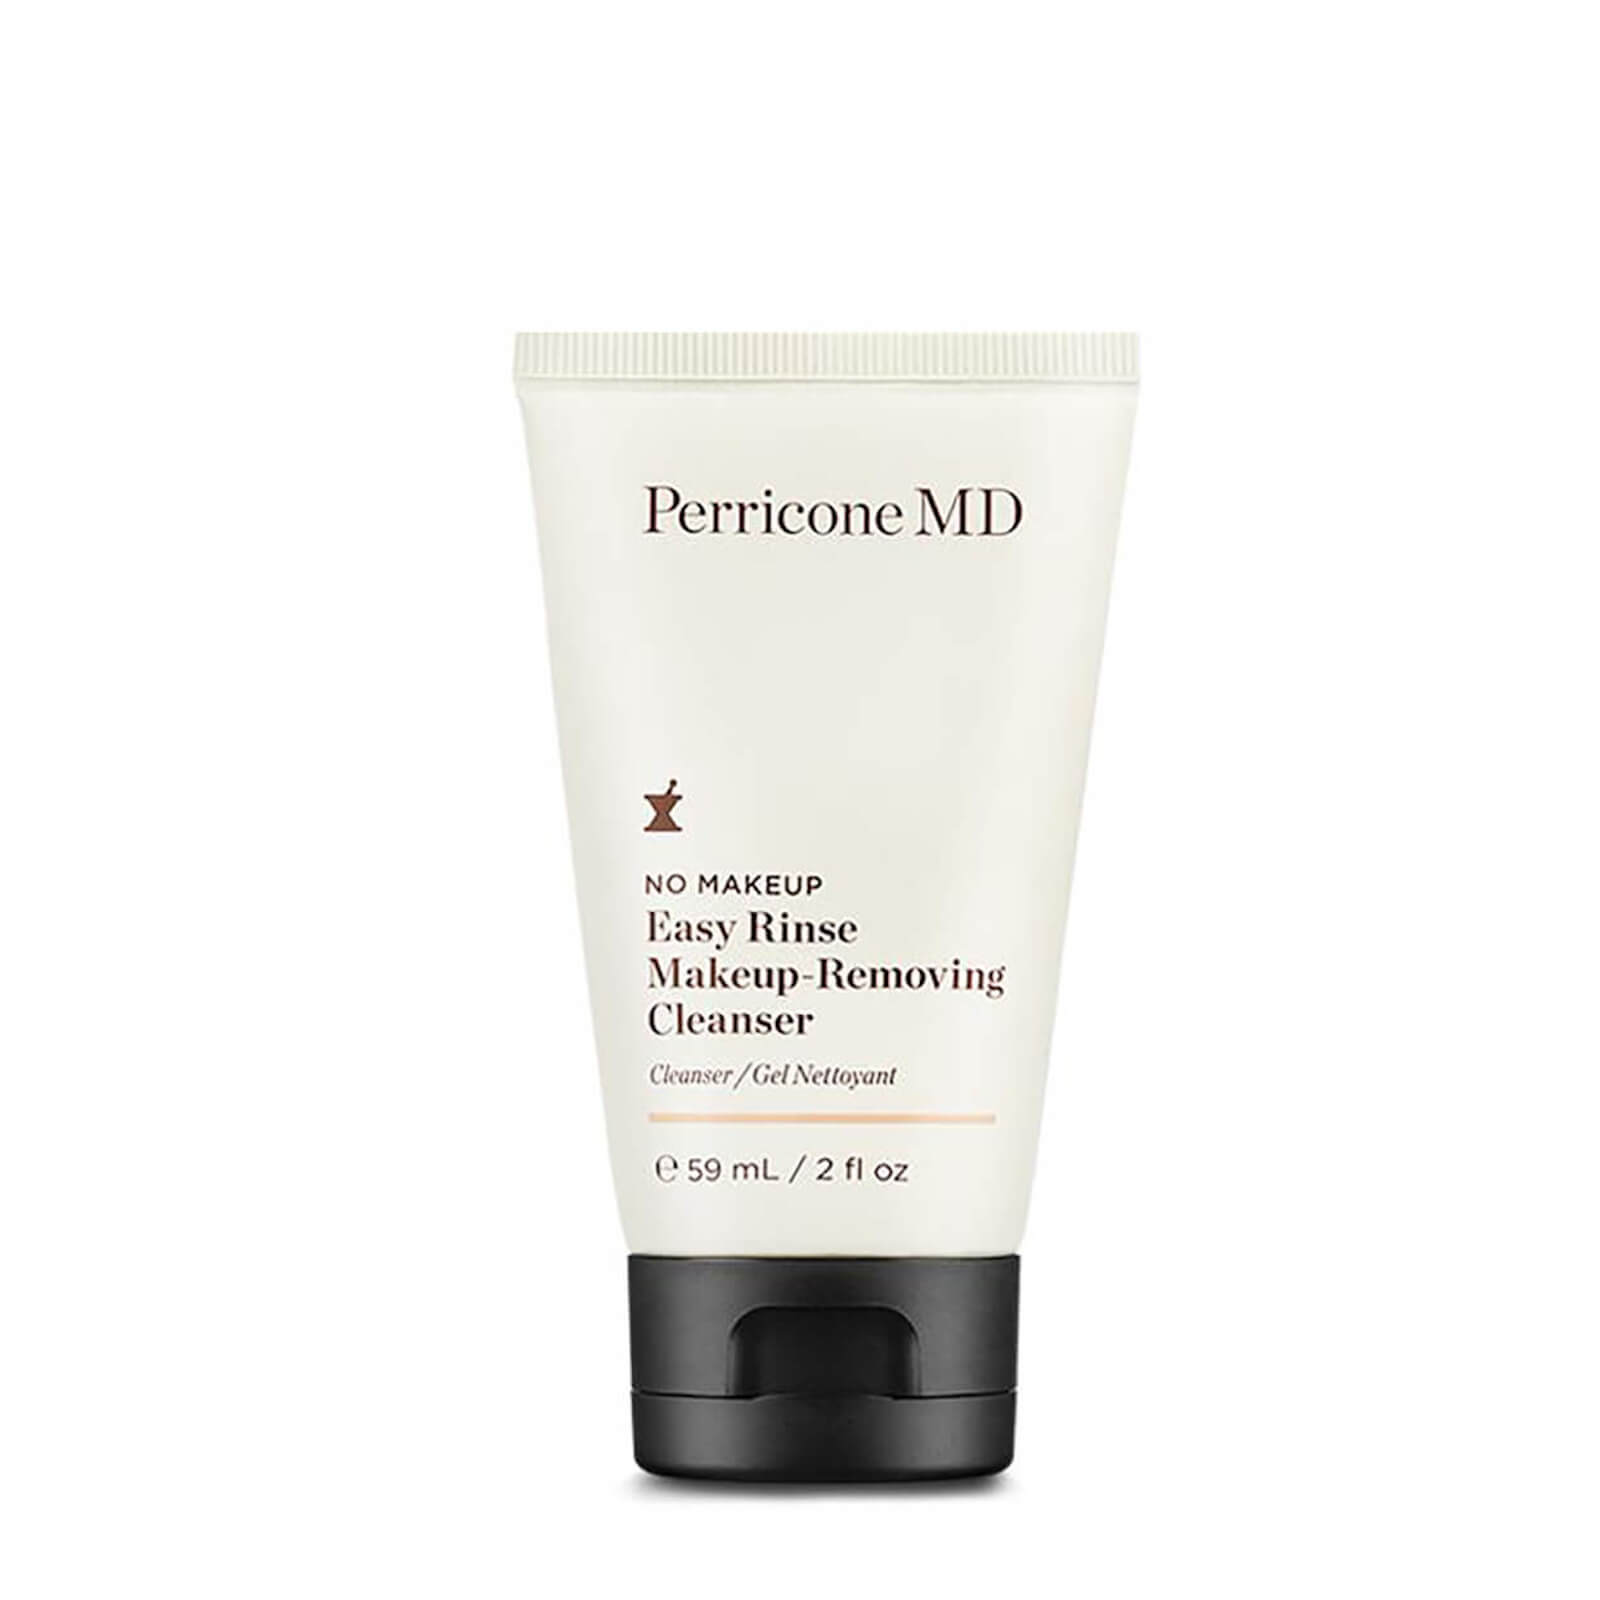 Perricone MD No Makeup Easy Rinse Makeup-Removing Cleanser - 2 oz / 59ml